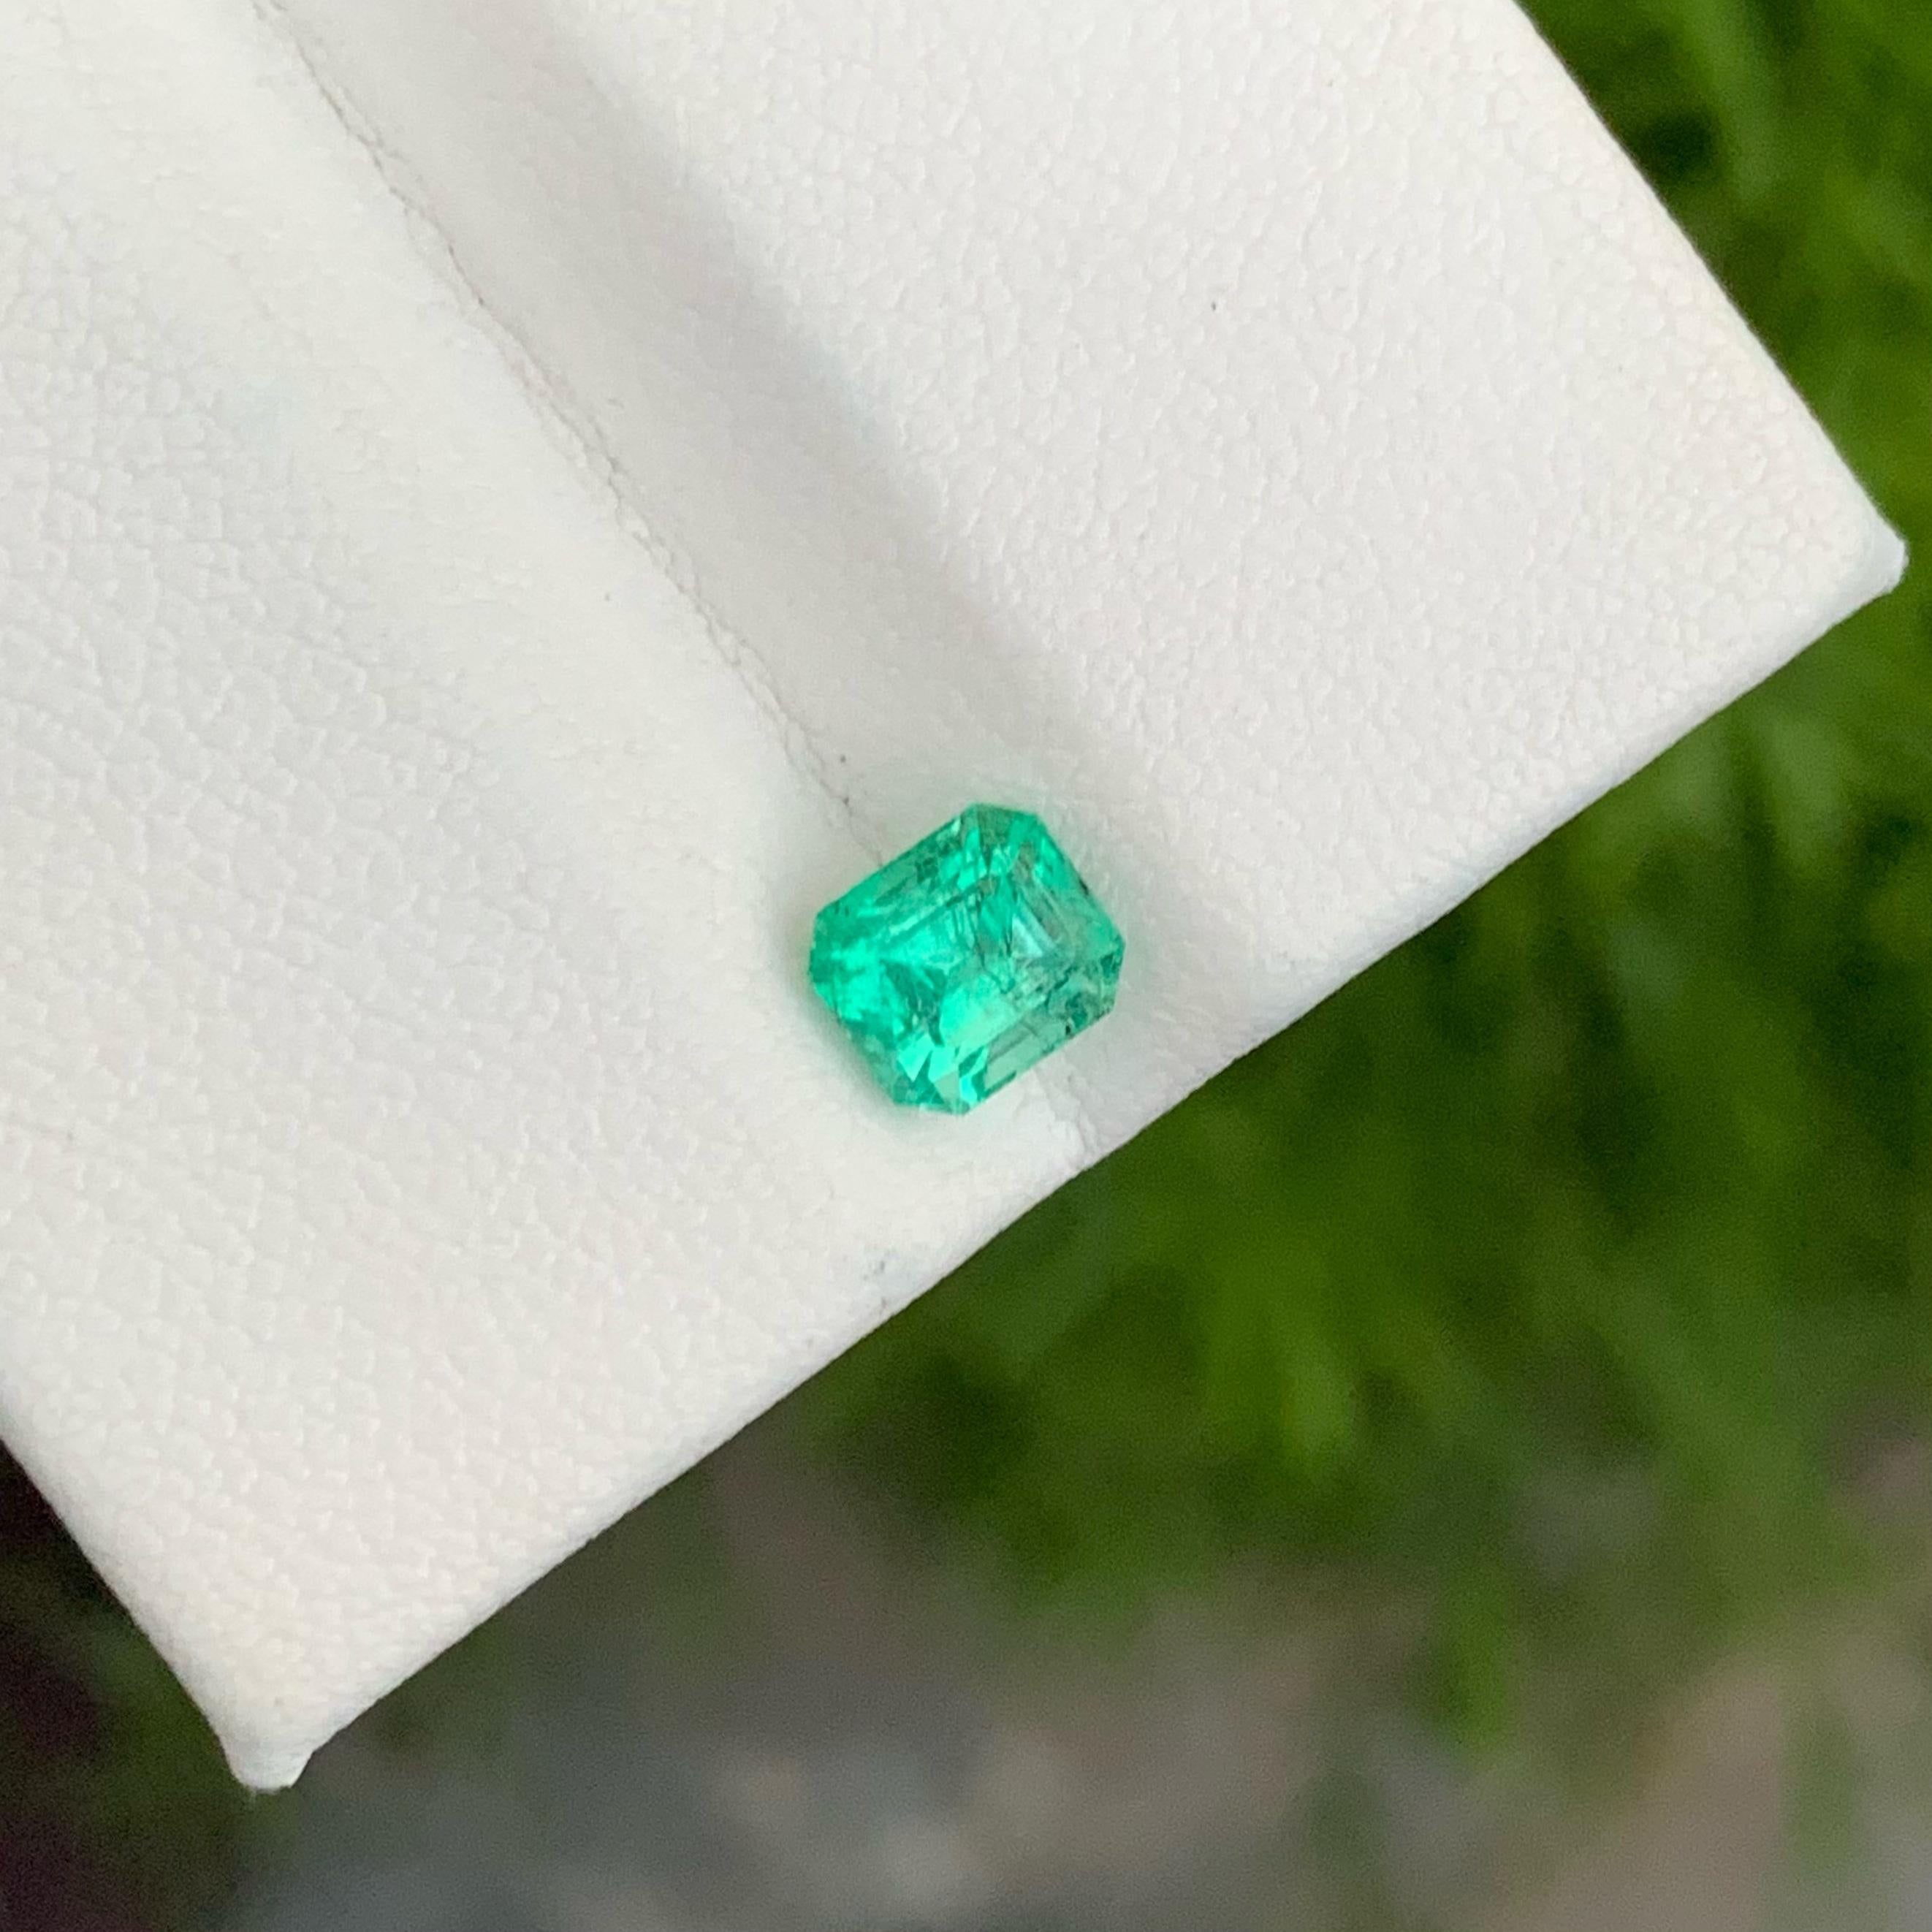 Weight 1.00 carats 
Dimensions 5.8x5.1x4.6mm
Treatment none 
Origin  Afghanistan 
Clarity SI (Slightly Included)
Shape octagon 
Cut emerald 



A high-quality emerald is a true marvel of nature, and this 1.00 carat emerald cut natural Afghani